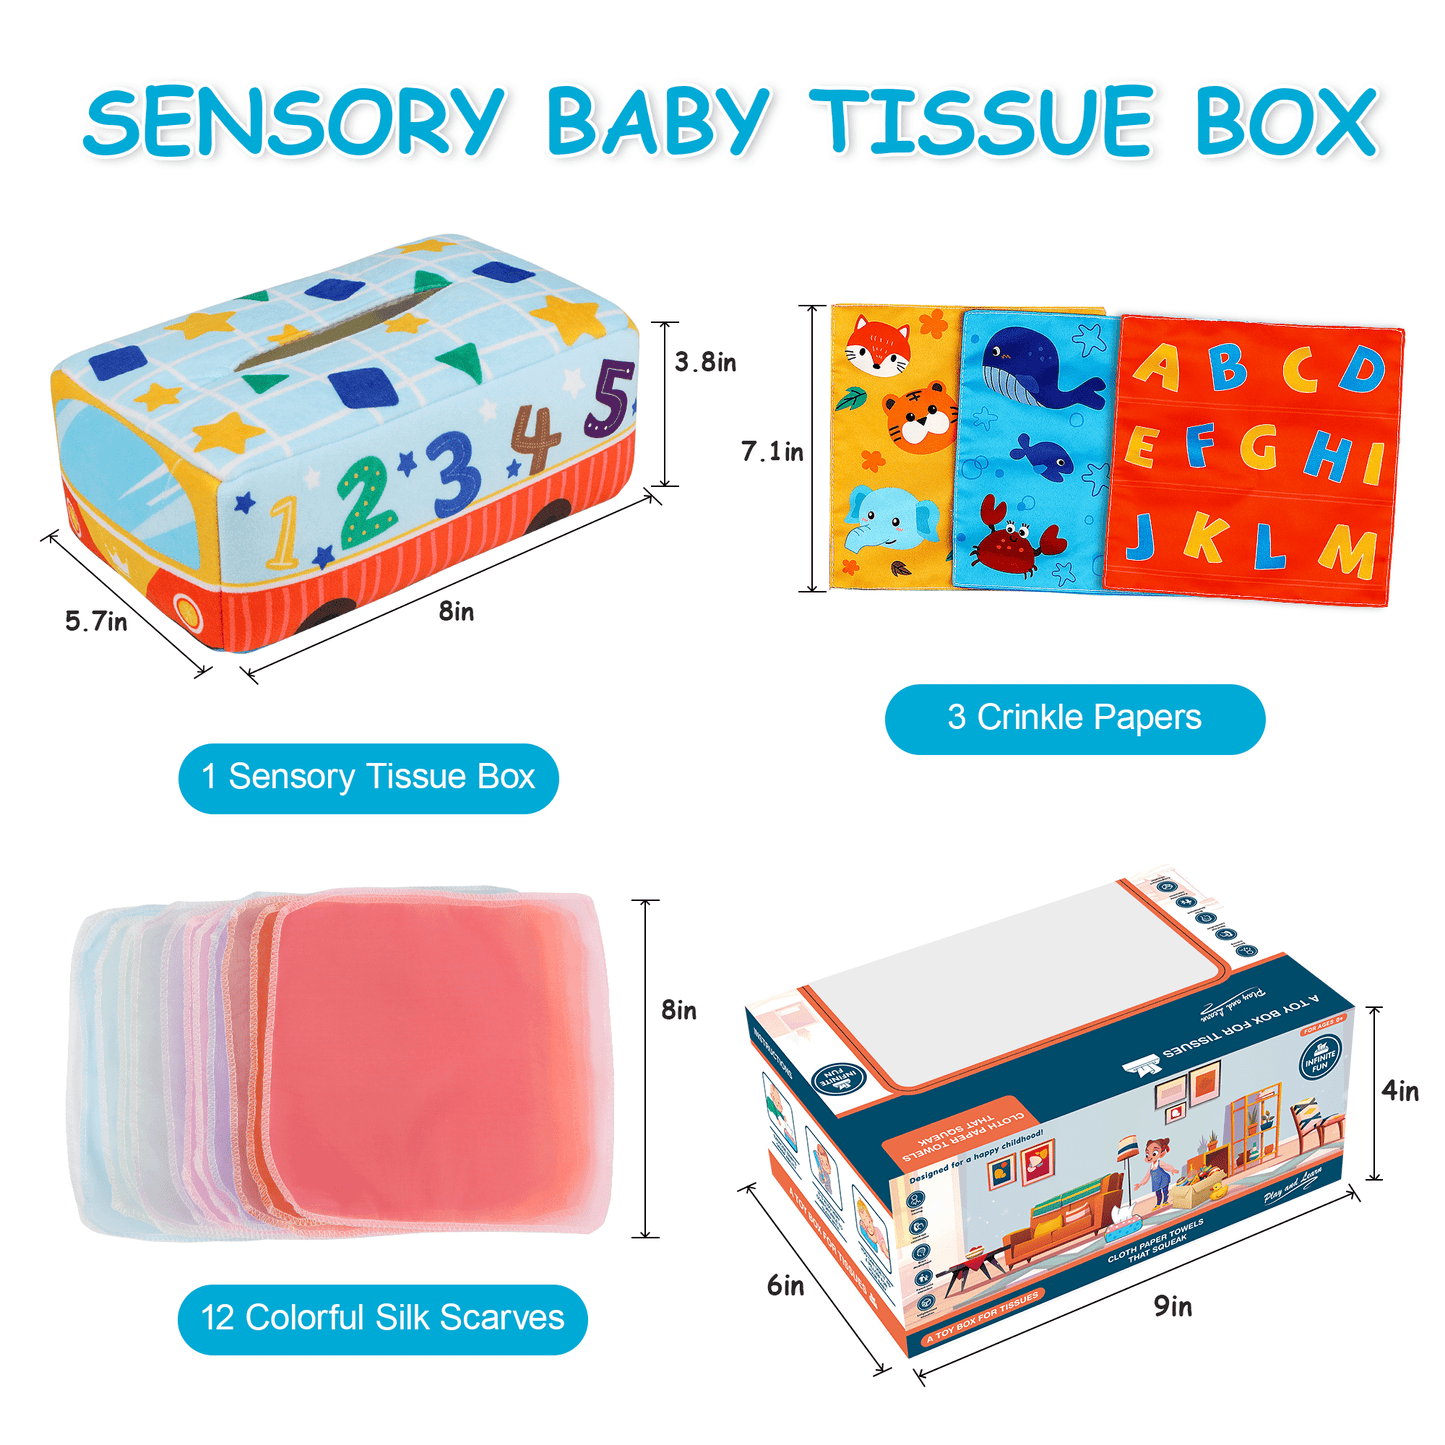 Baby Tissue Box Toy for Toddlers, Early Educational Learning Toys, Christmas Gift Montessori STEM Toys for Kids Boys Girls Aged 6 Months +